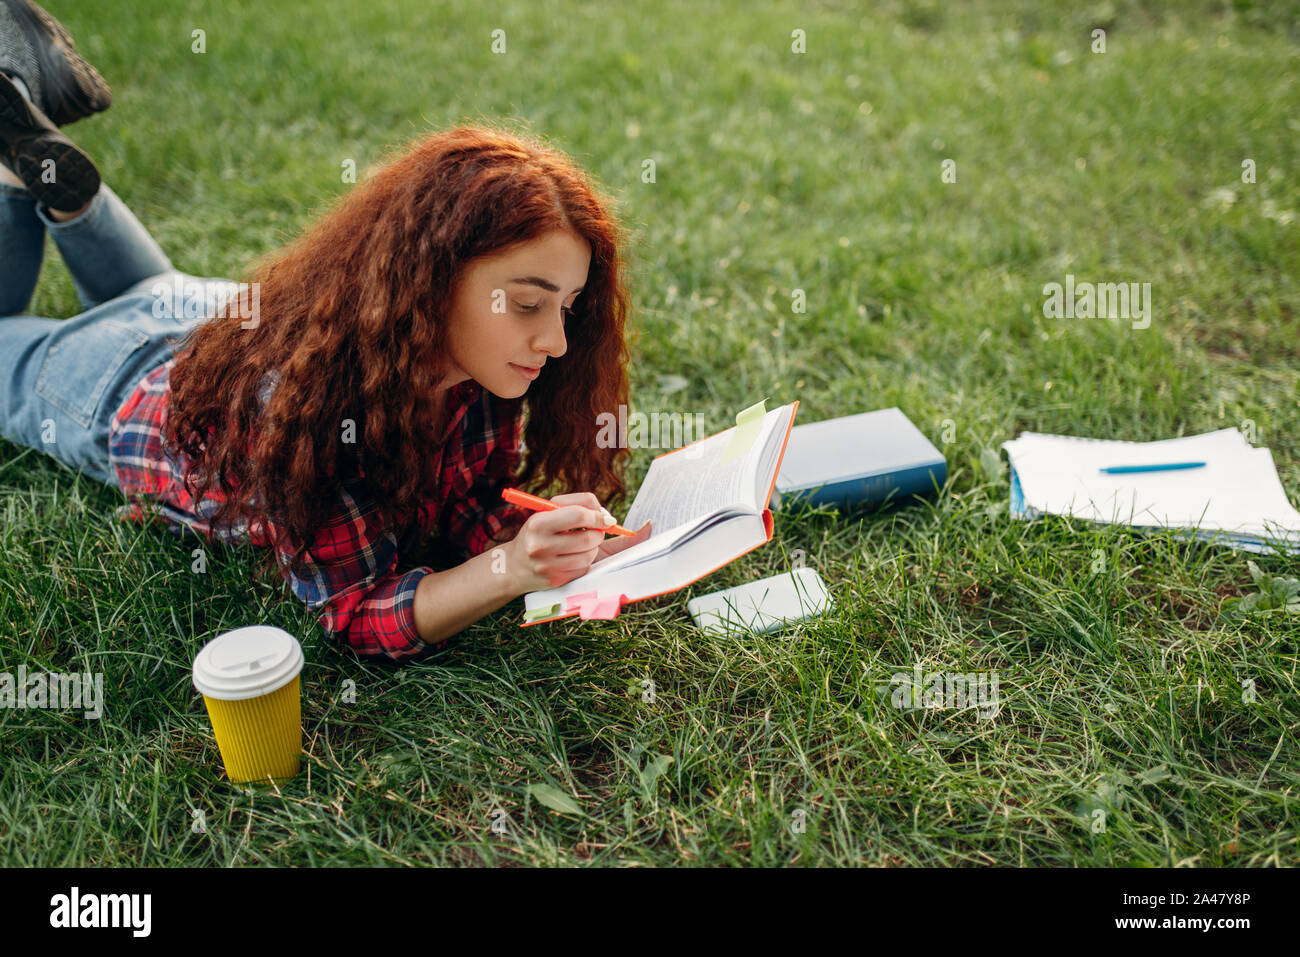 Female student preparing for exams on the grass Stock Photo